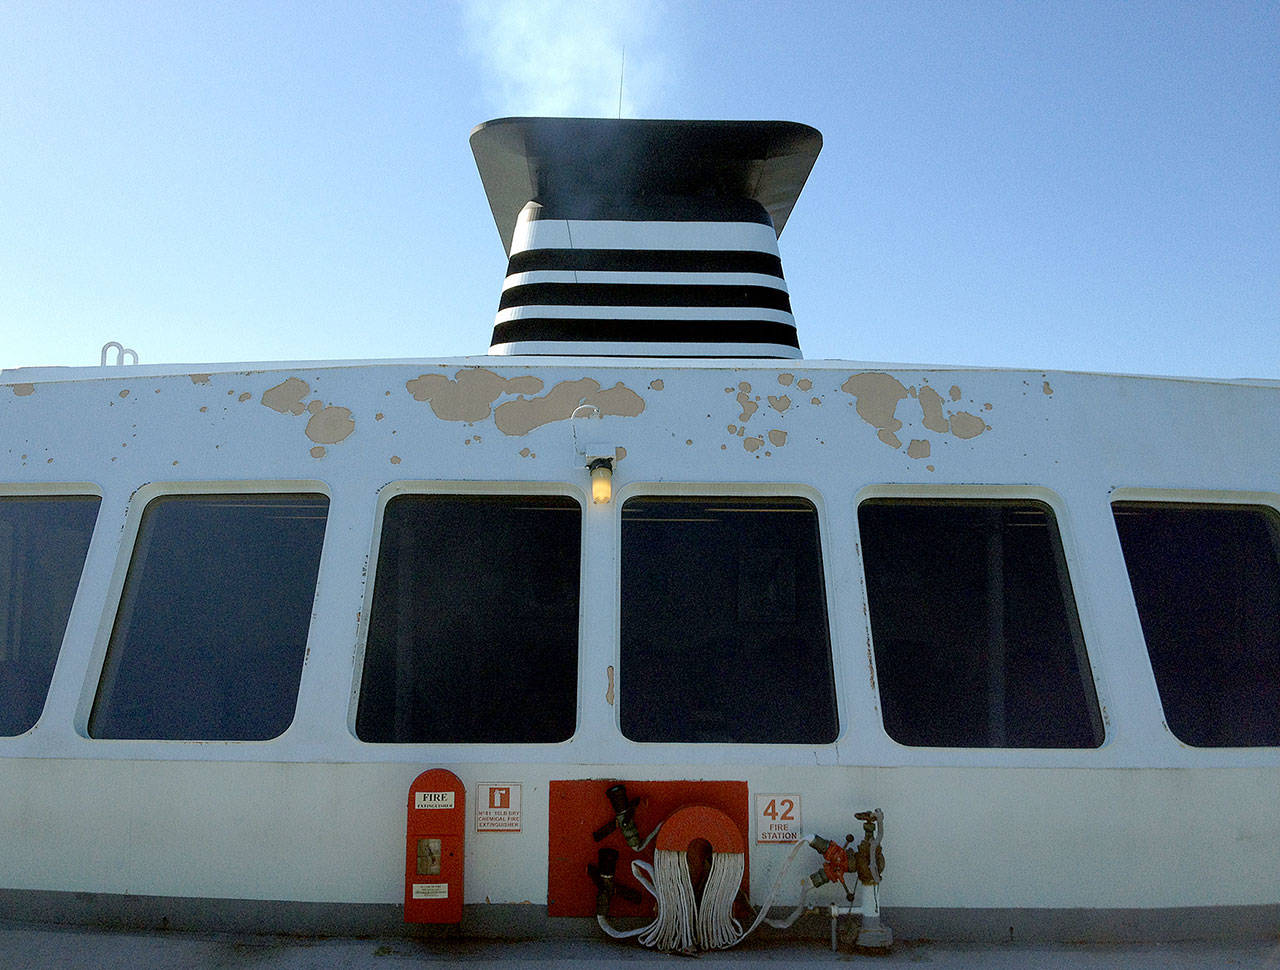 A stack on one of the Jumbo Mark II state ferries emits exhaust during a sailing between Seattle and Bainbridge Island. (Chuck Taylor / The Herald)